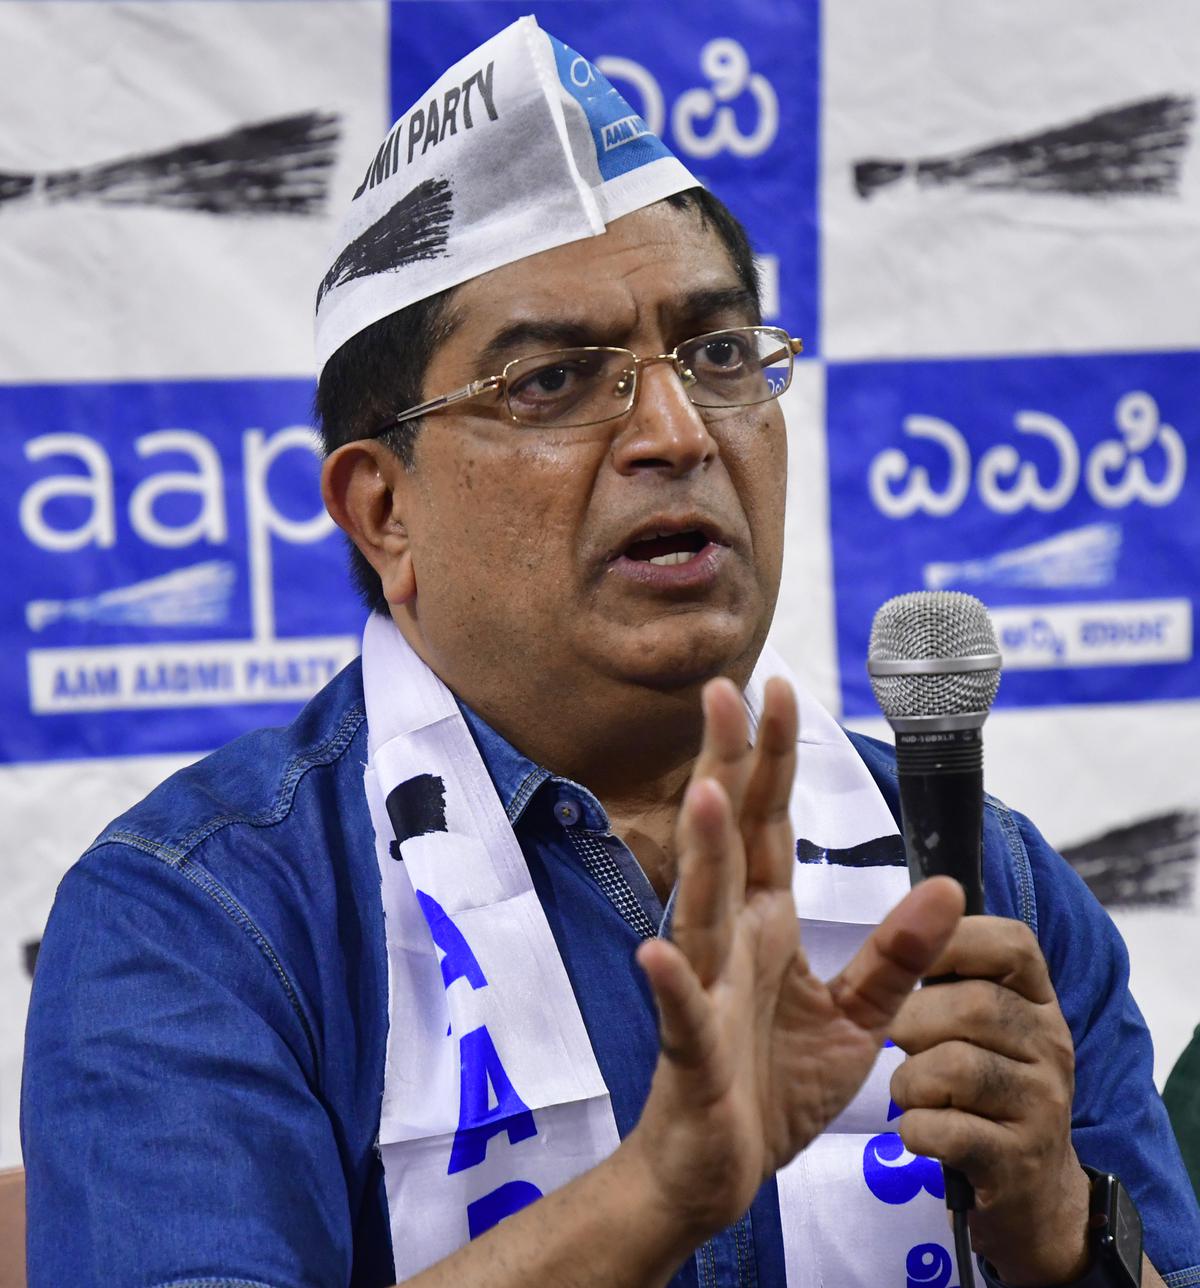 A common man in such case would have been arrested: AAP leader Bhaskar Rao  - The Hindu